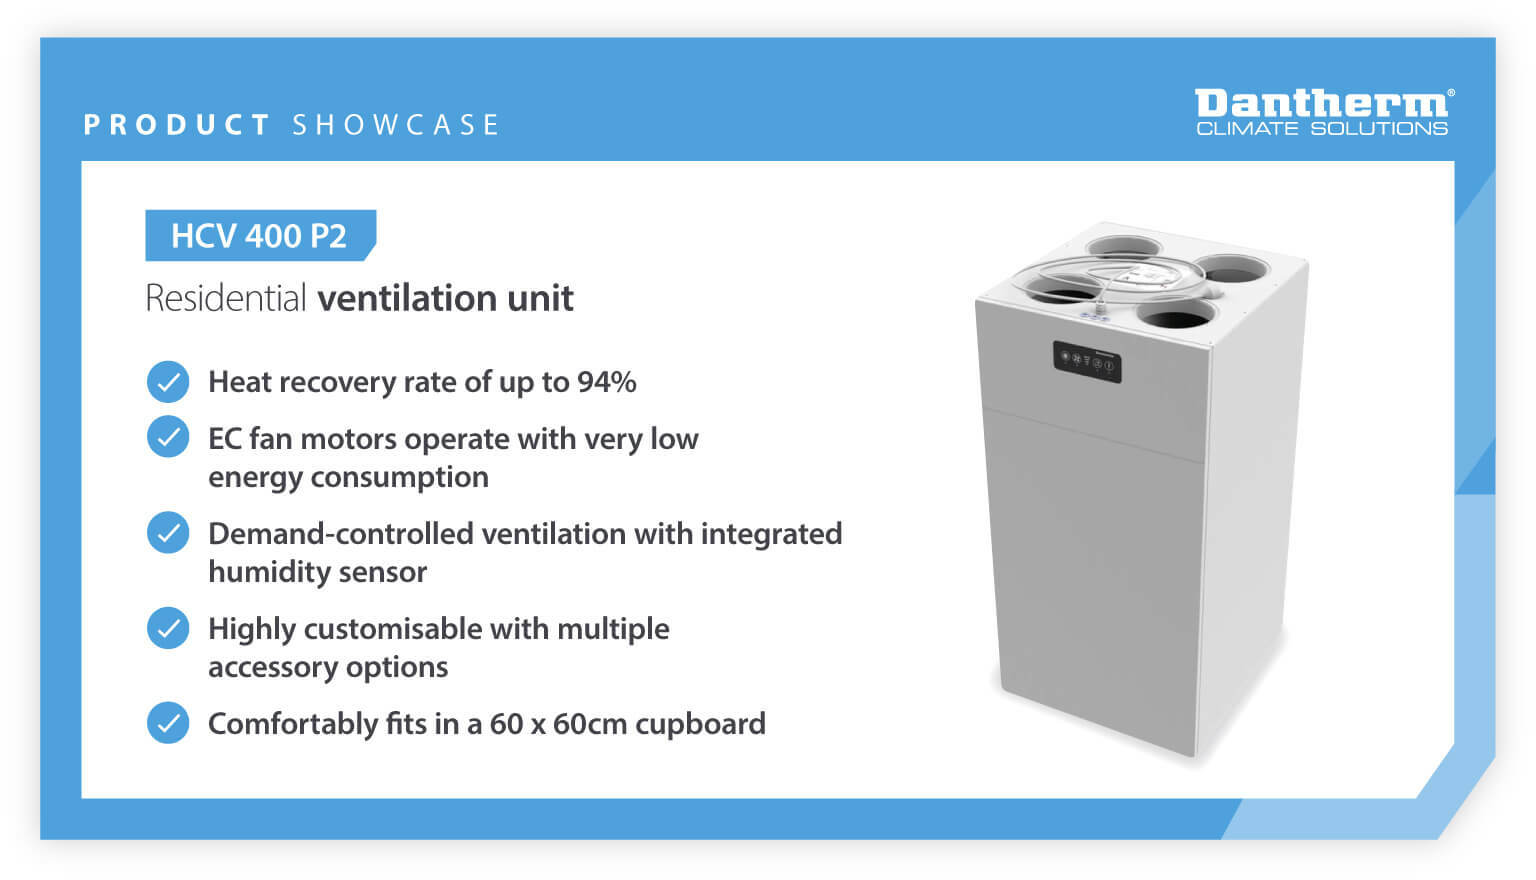 Product showcase of Dantherm HCV 400 P2 residential ventilation unit features and benefits including low energy consumption